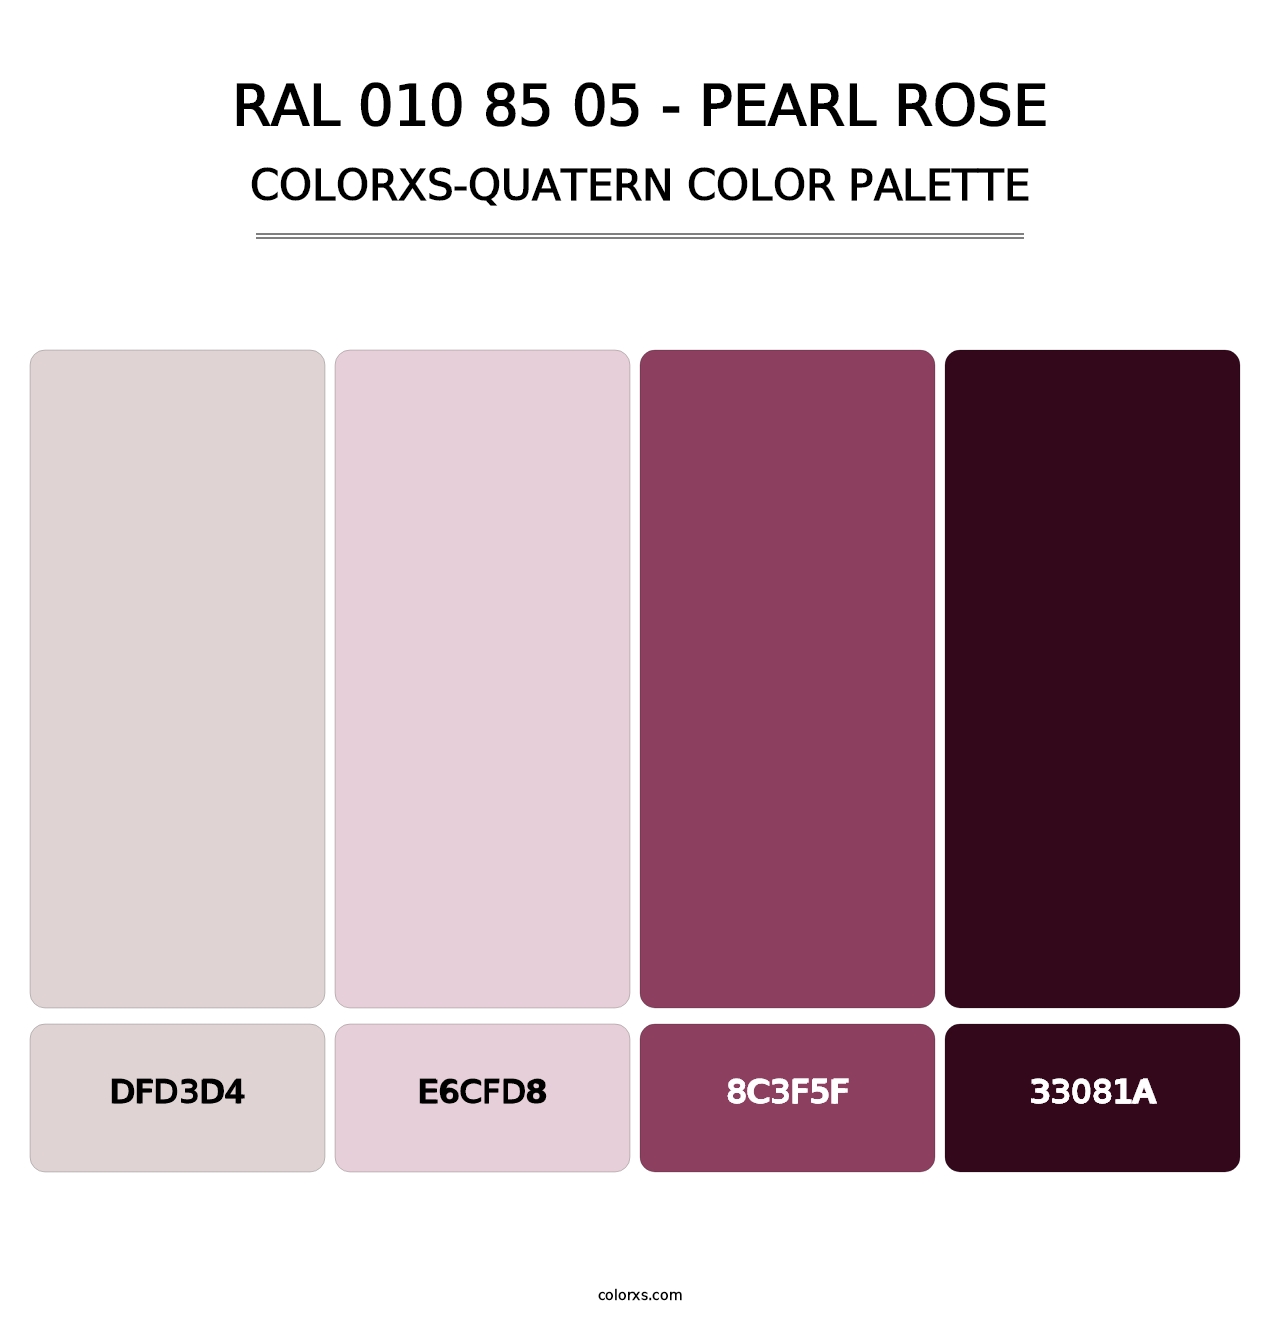 RAL 010 85 05 - Pearl Rose - Colorxs Quatern Palette